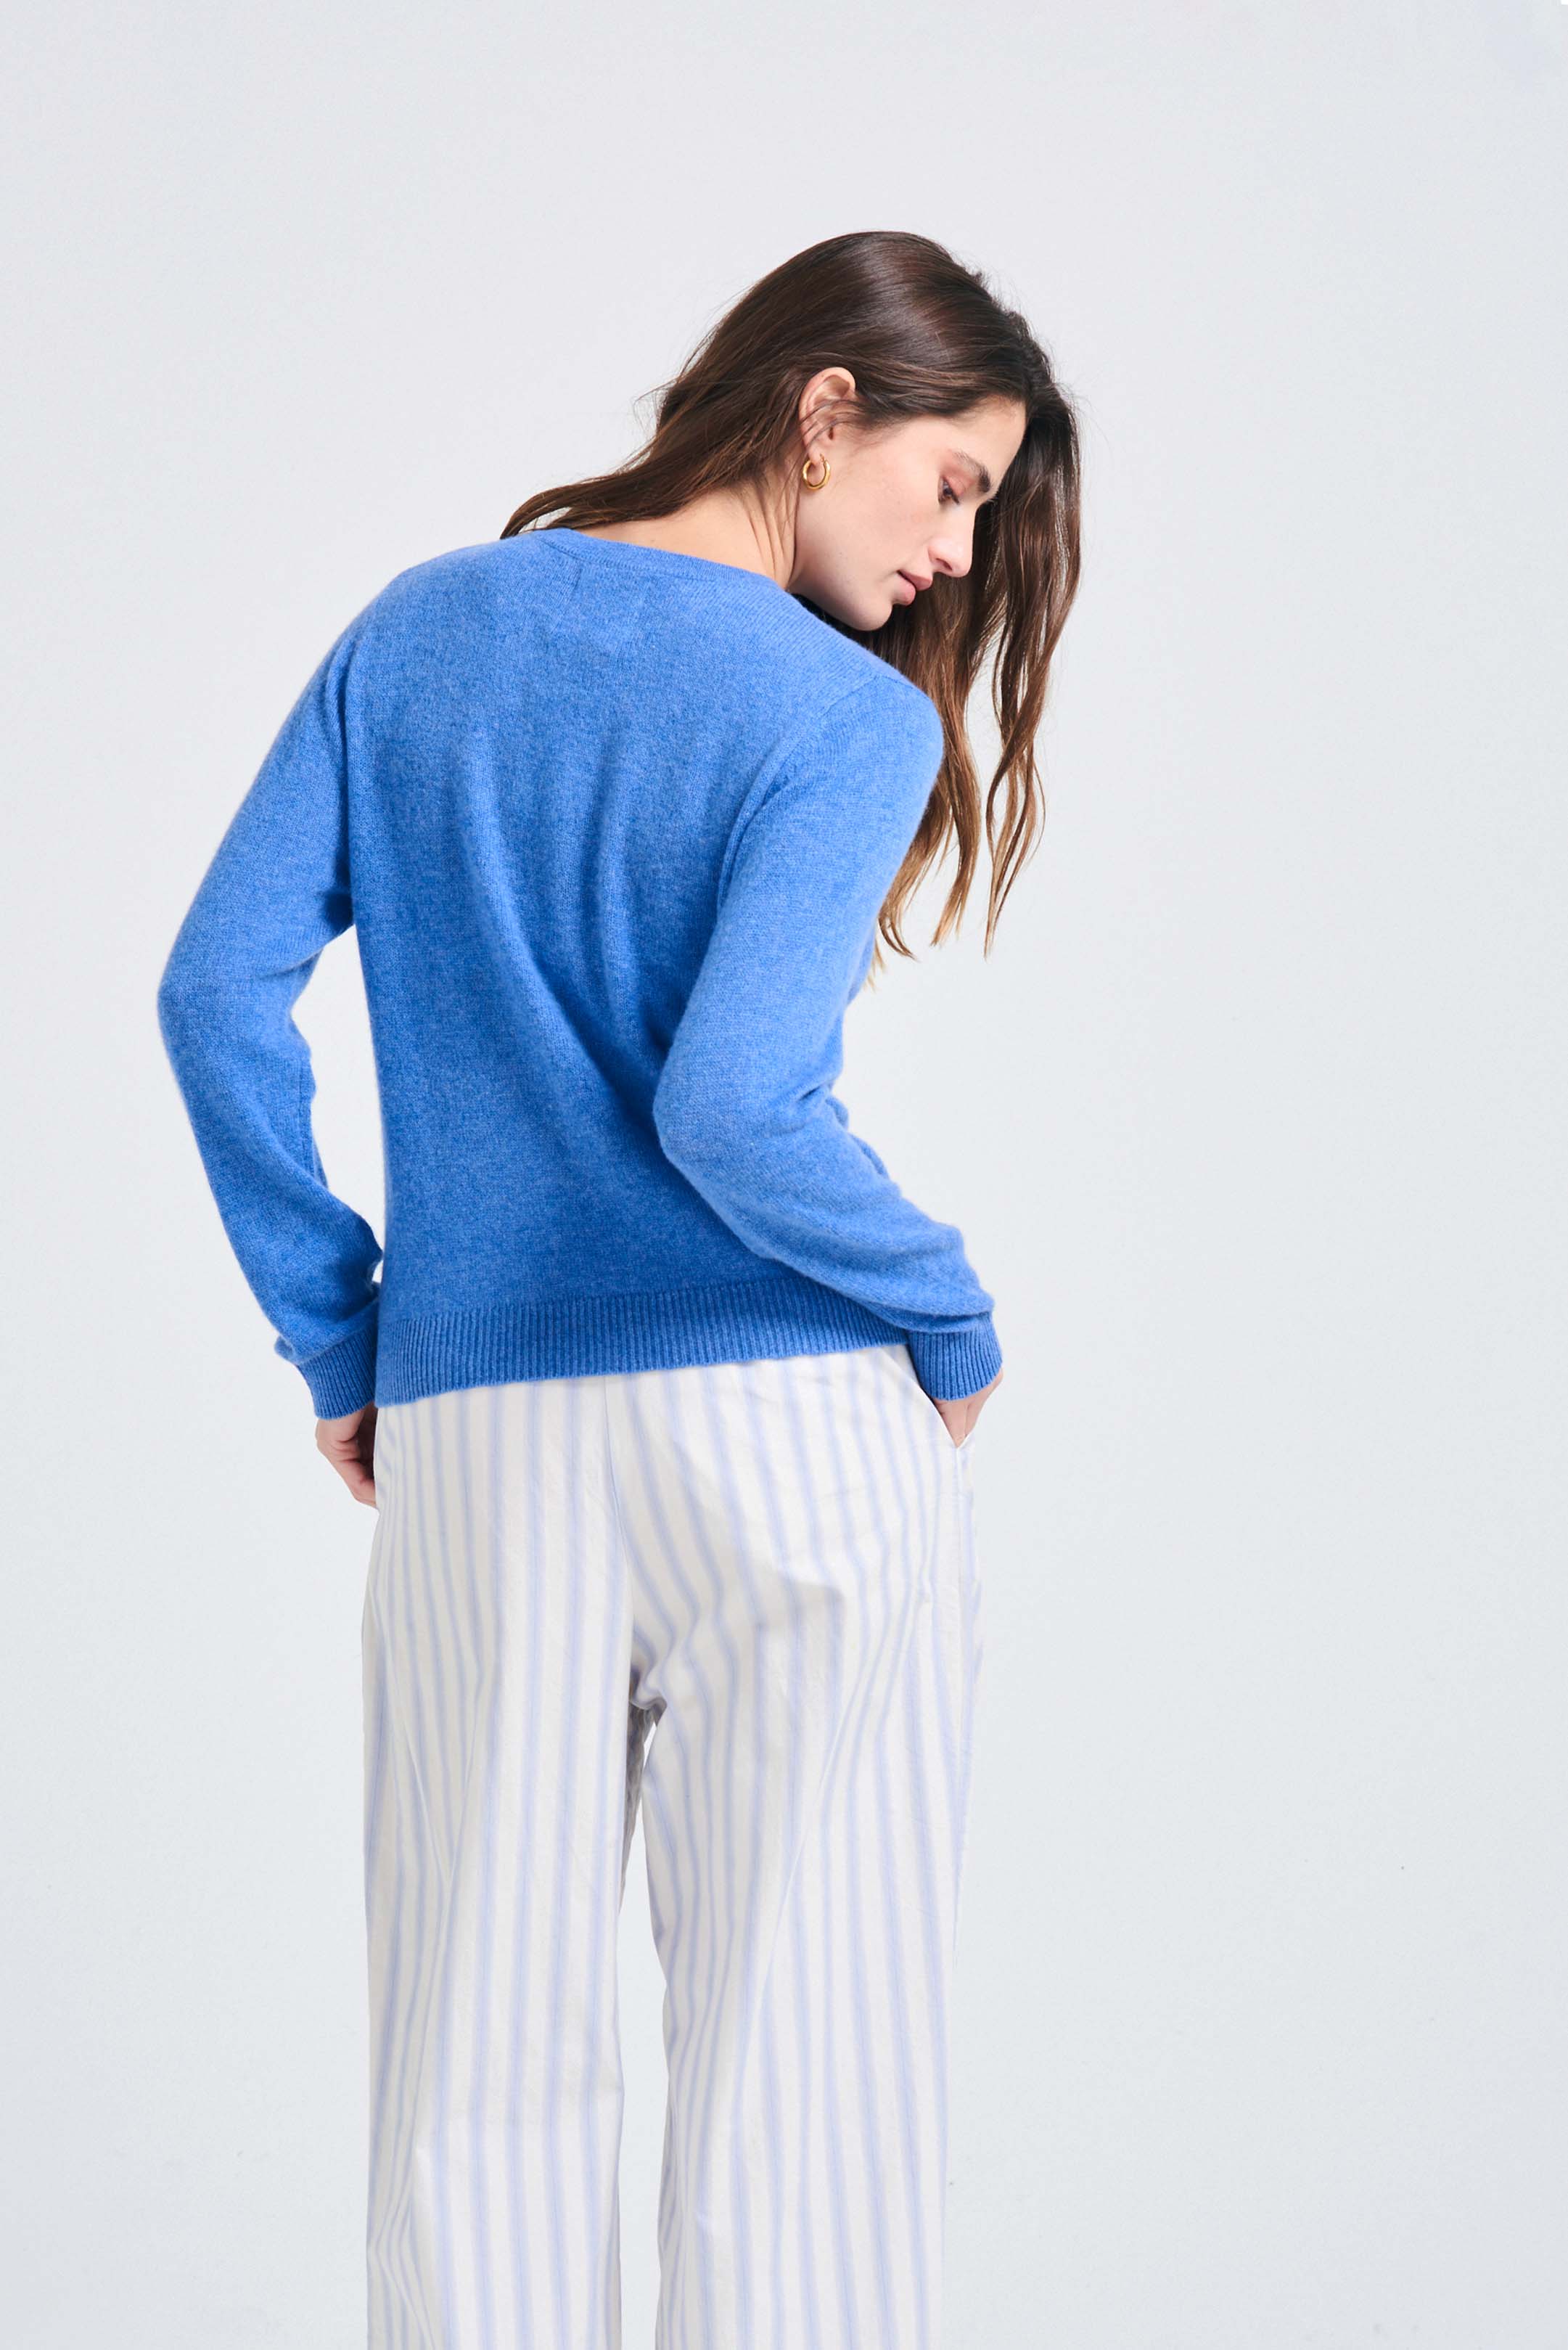 Brown haired female model wearing Jumper1234 Periwinkle blue lighter weight crew neck cashmere jumper facing away from the camera